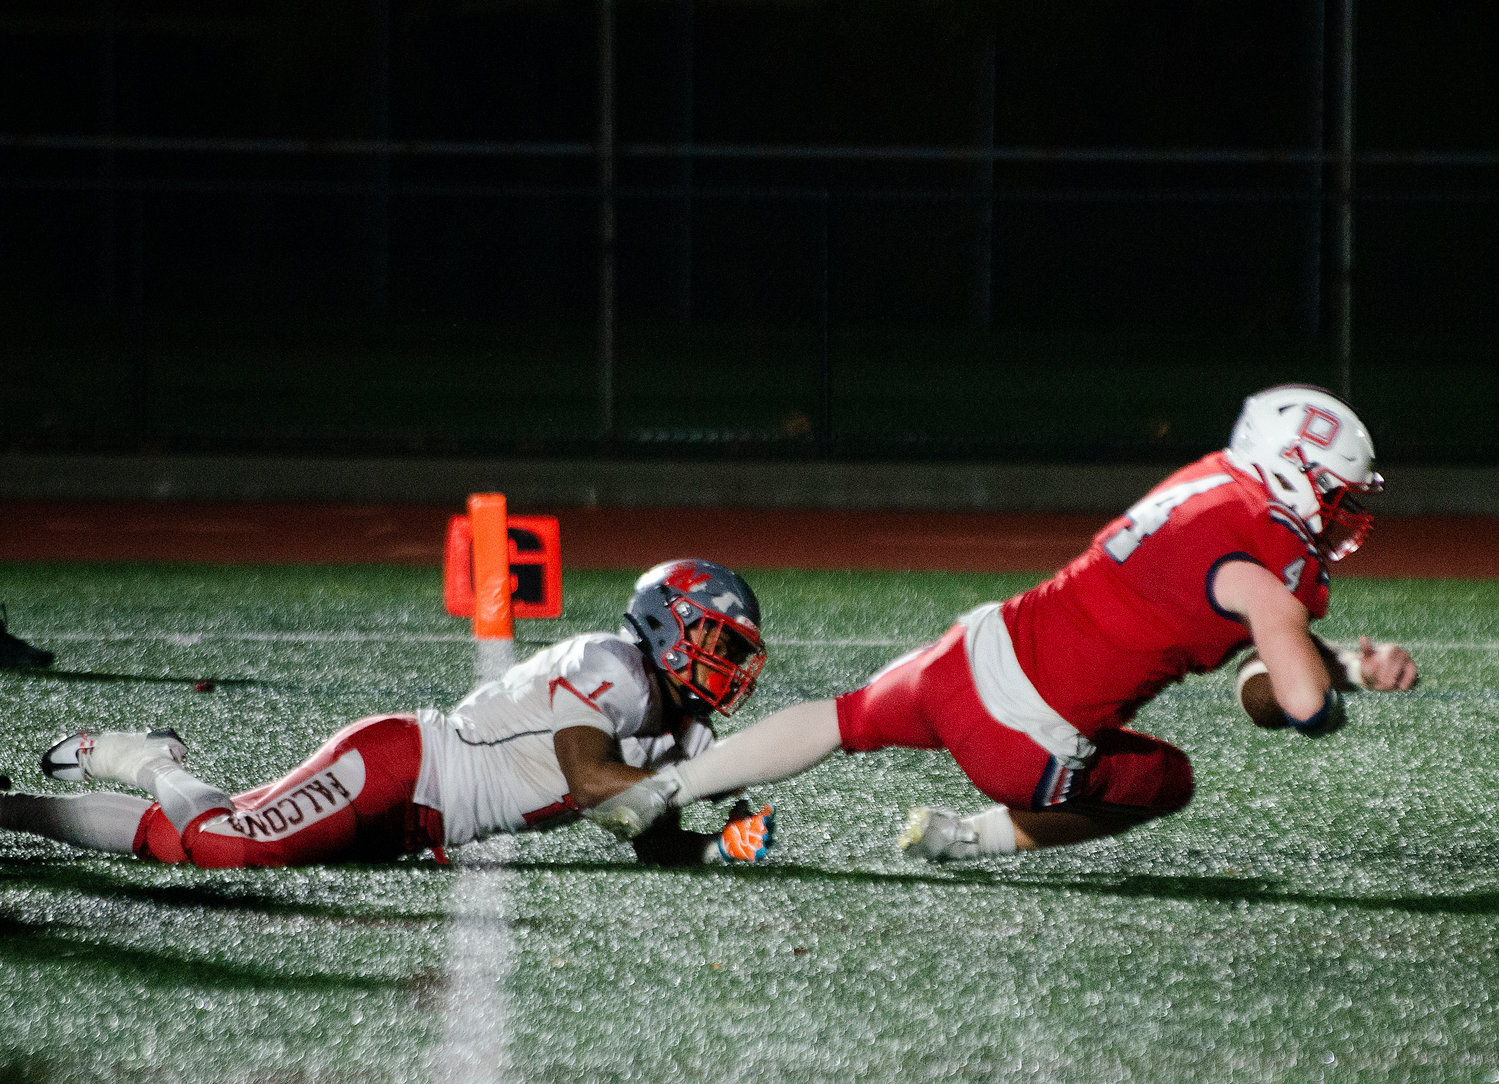 Portsmouth High’s Neal Tullson plunges into the end zone for the Patriots’ third score of the night during the Division II semifinals against Cranston West at home Friday night. The Patriots won, 20-7, and advanced to play in the Super Bowl against St. Raphael Academy at noon on Saturday, Nov. 12, at Cranston Stadium.